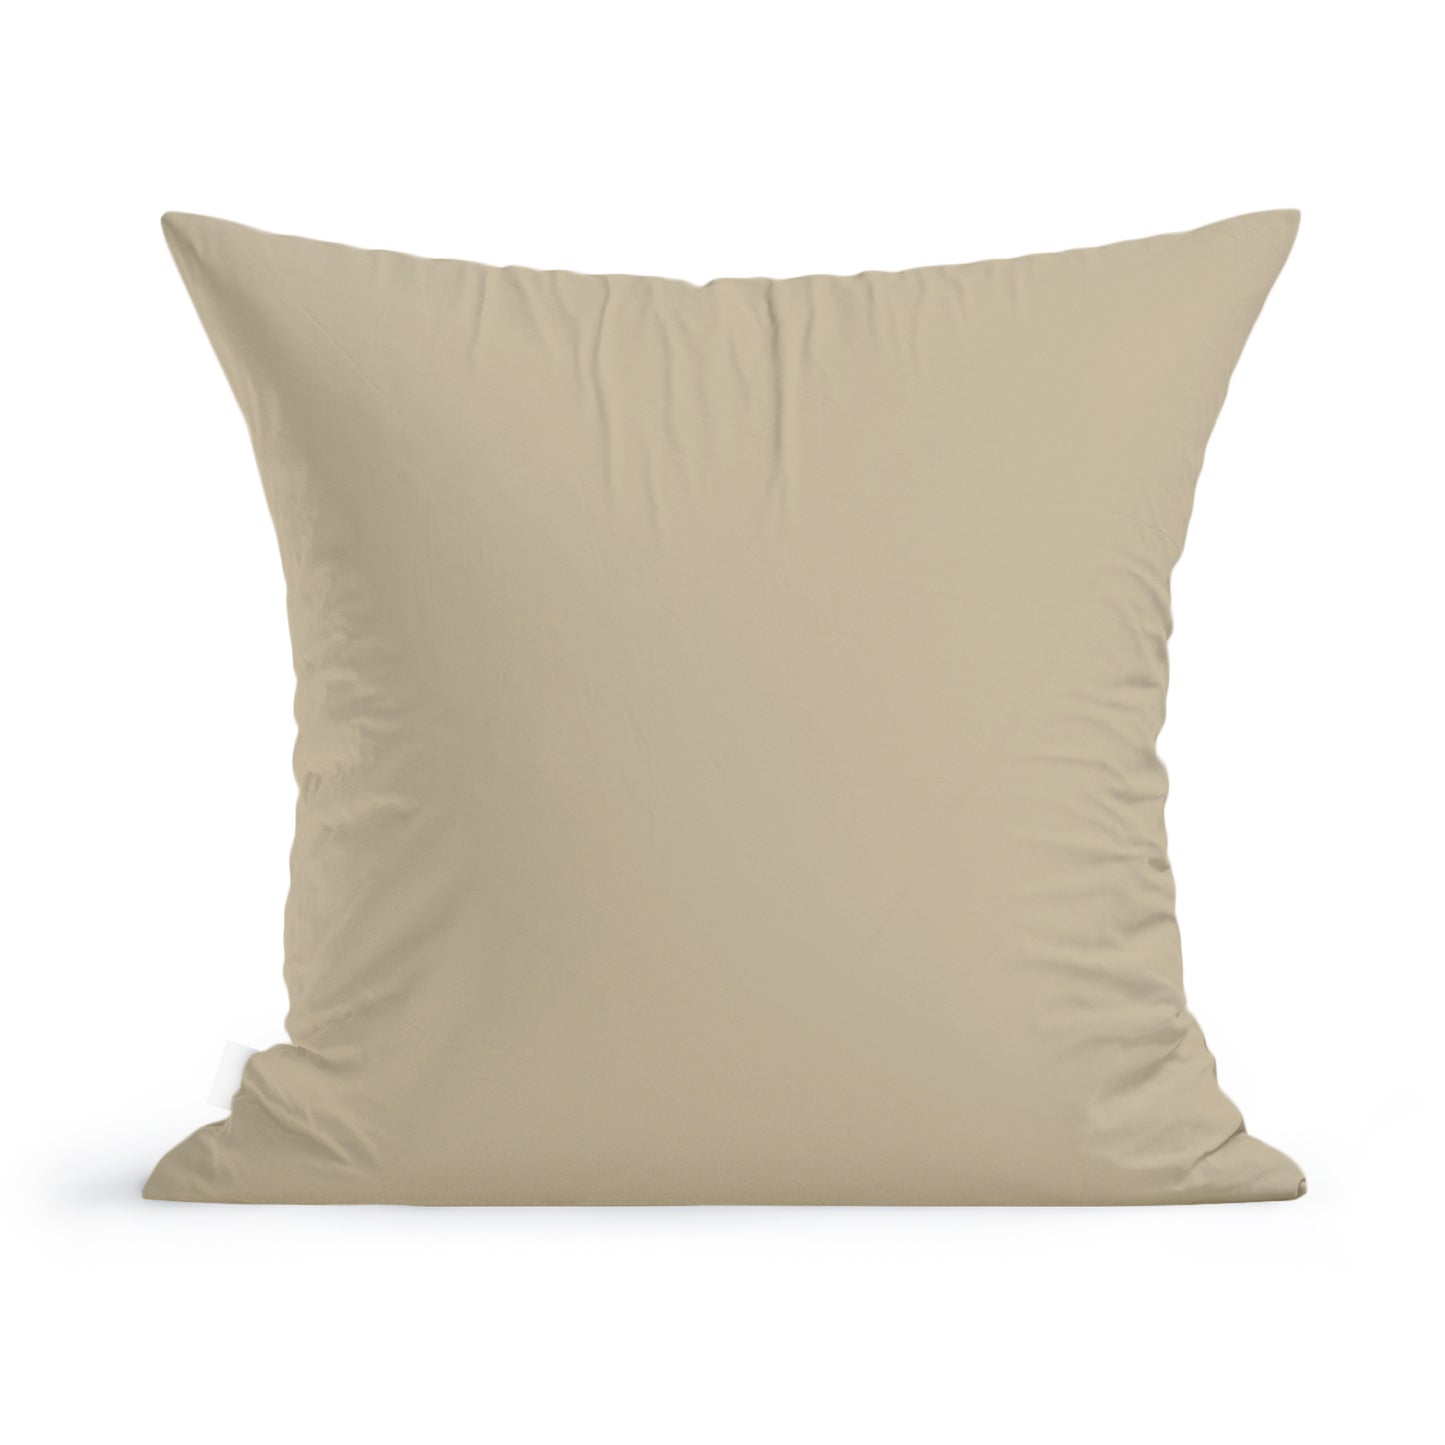 A Wild Daisies Pillow by Rustic County on a white background, made of 100% cotton, showcasing its smooth texture and subtle creases, ideal for minimalist home decor.